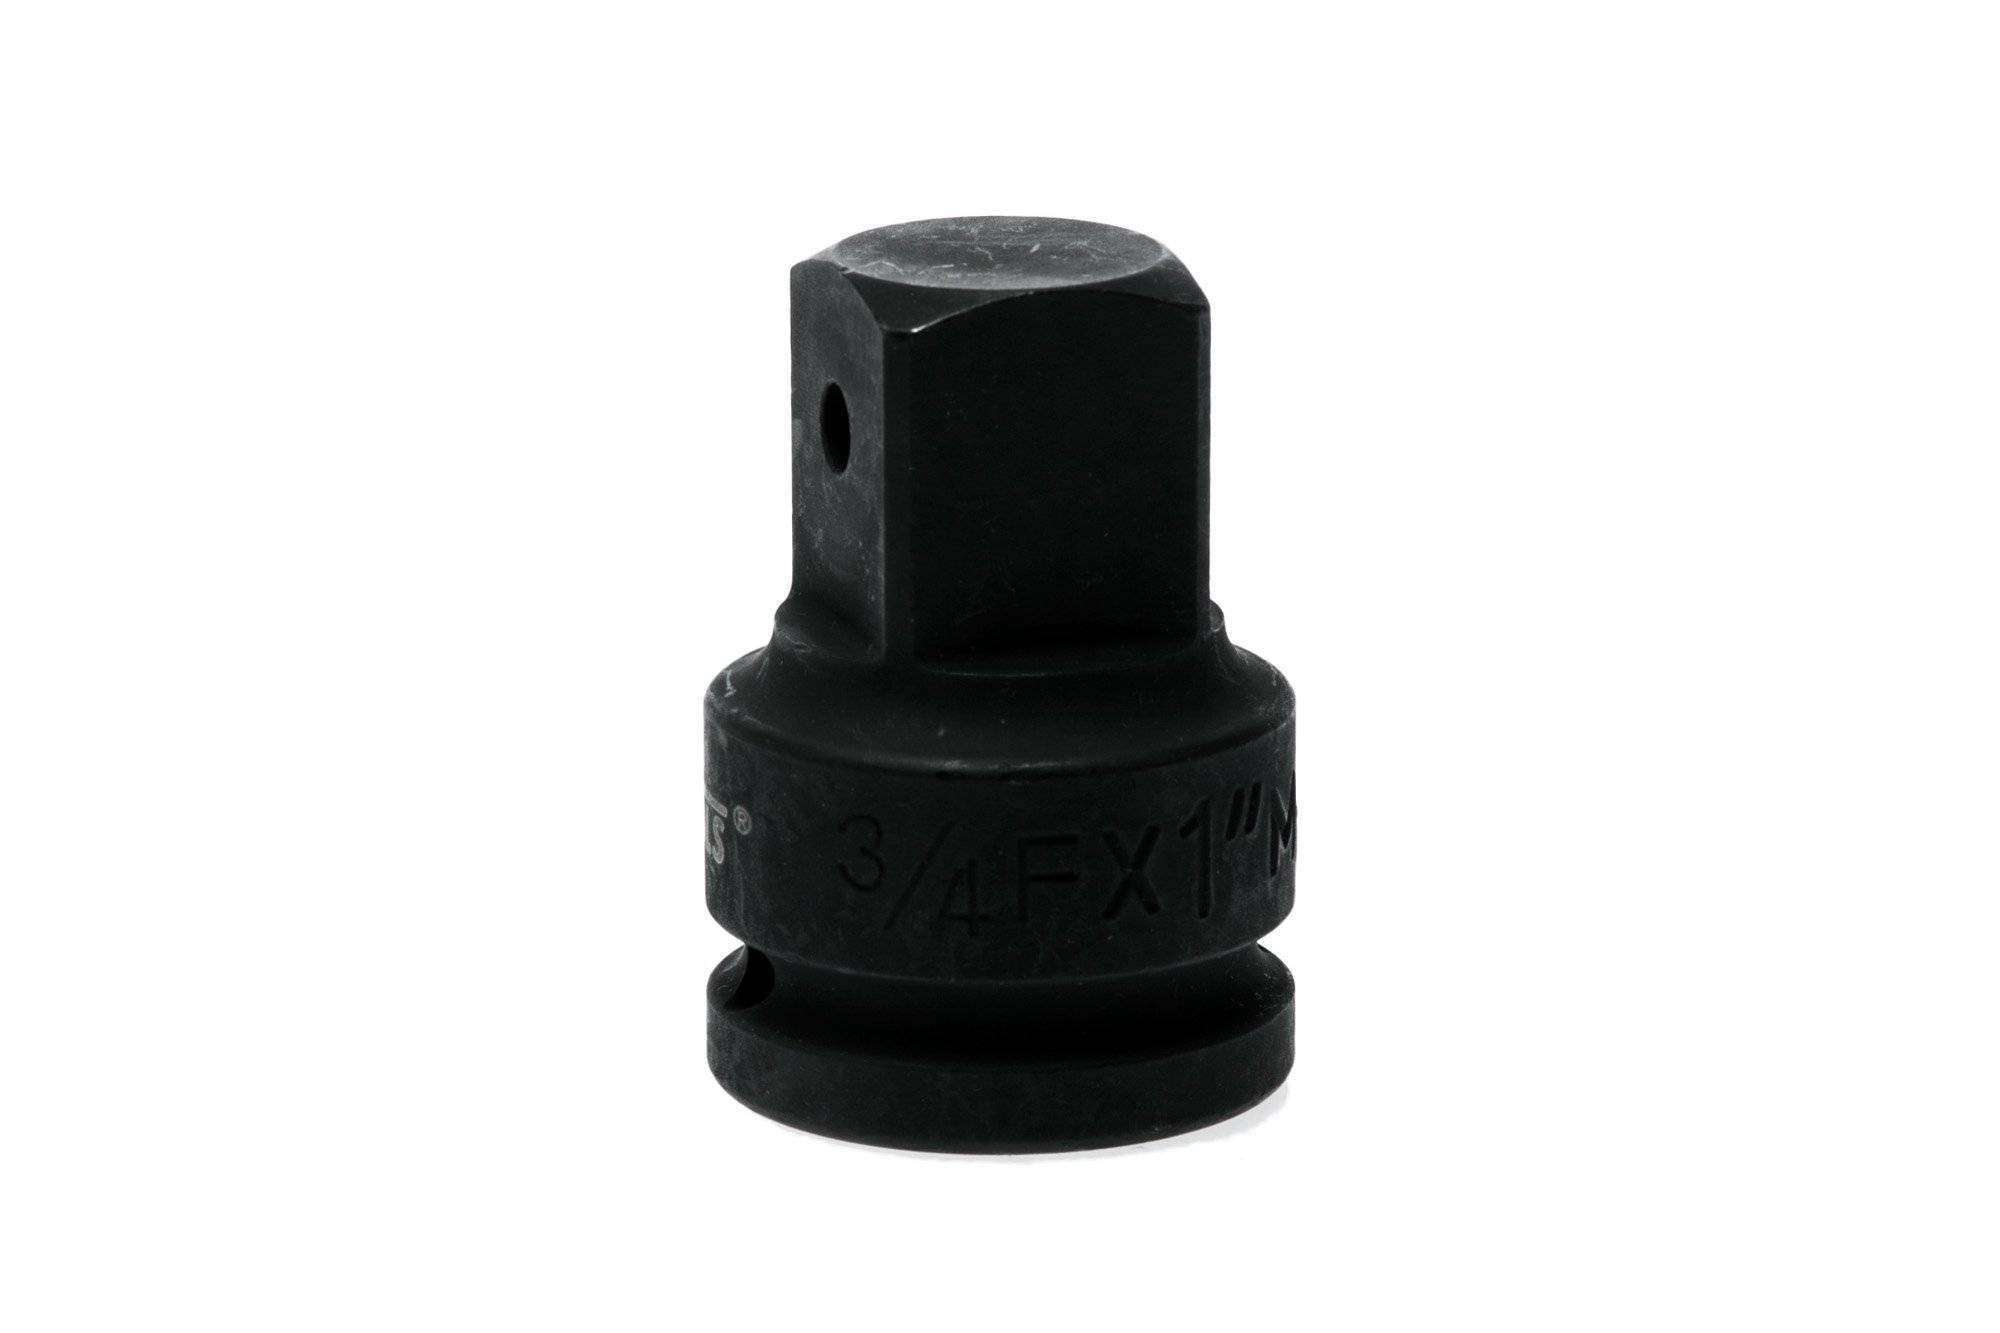 Teng Tools 3/4 Inch Drive Female to 1 Inch Male Adaptor - 940085-C